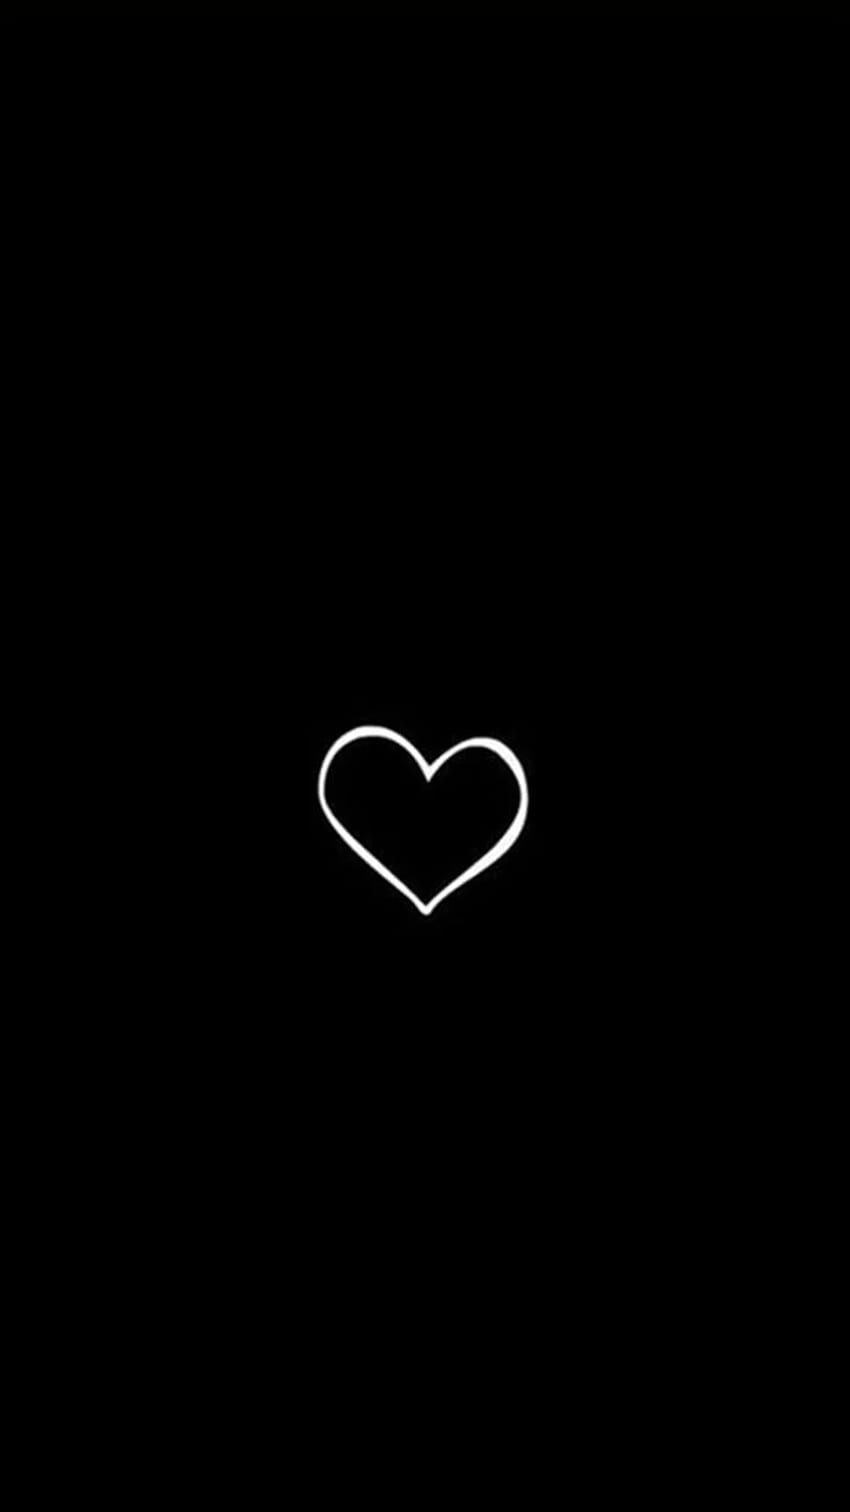 Simple Heart Symbol Black Background iPhone 6 . Heart iphone , Simple ...